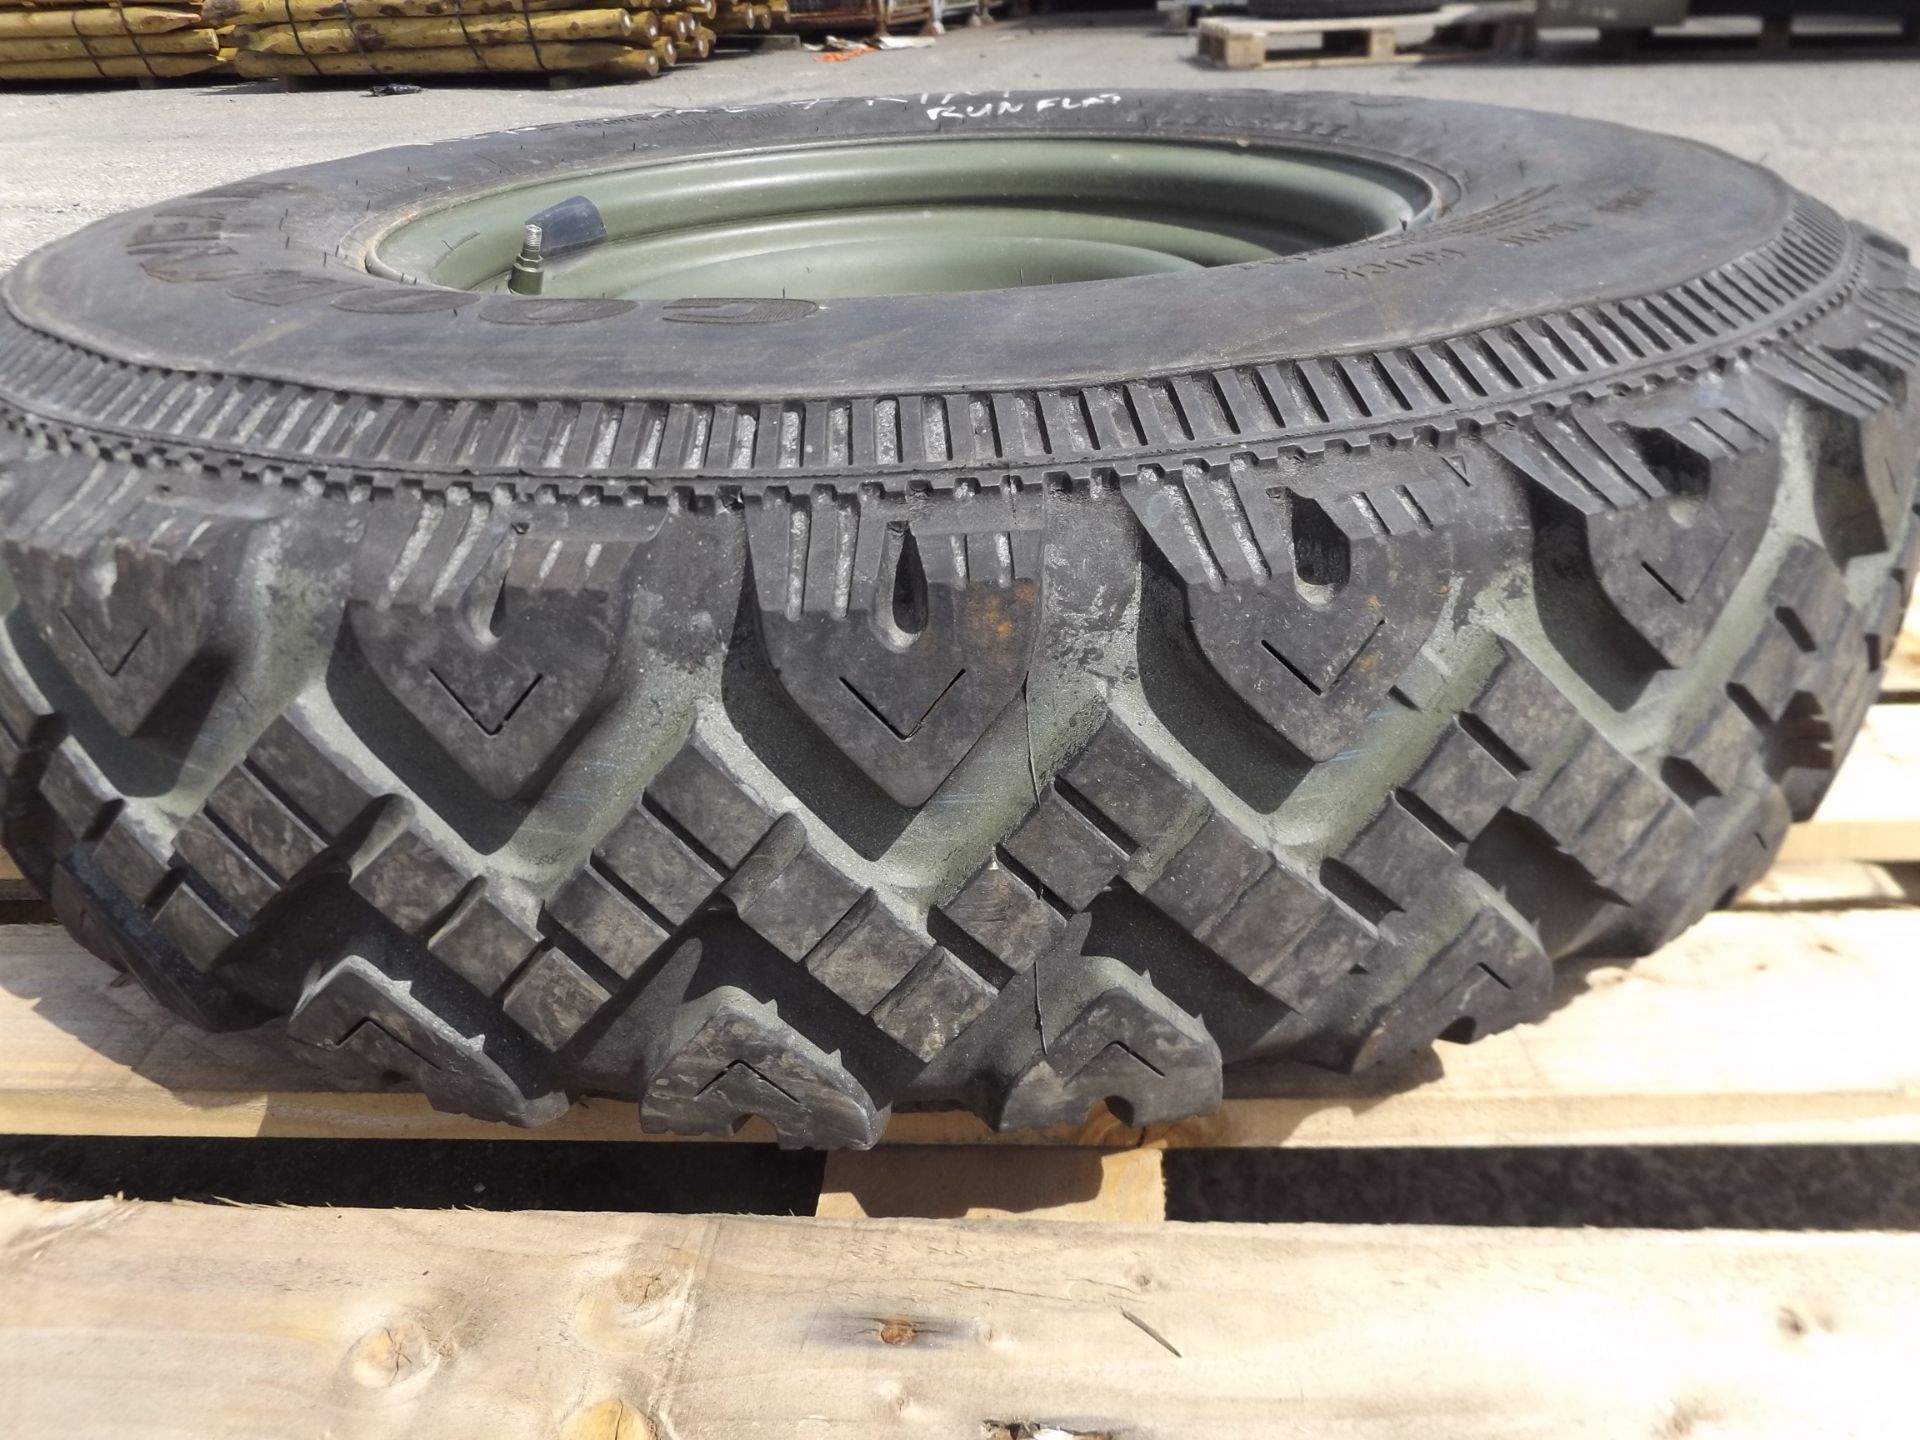 1 x Goodyear G90 7.50R 16C Tyre complete with Run Flat insert and Wolf Rim - Image 5 of 5